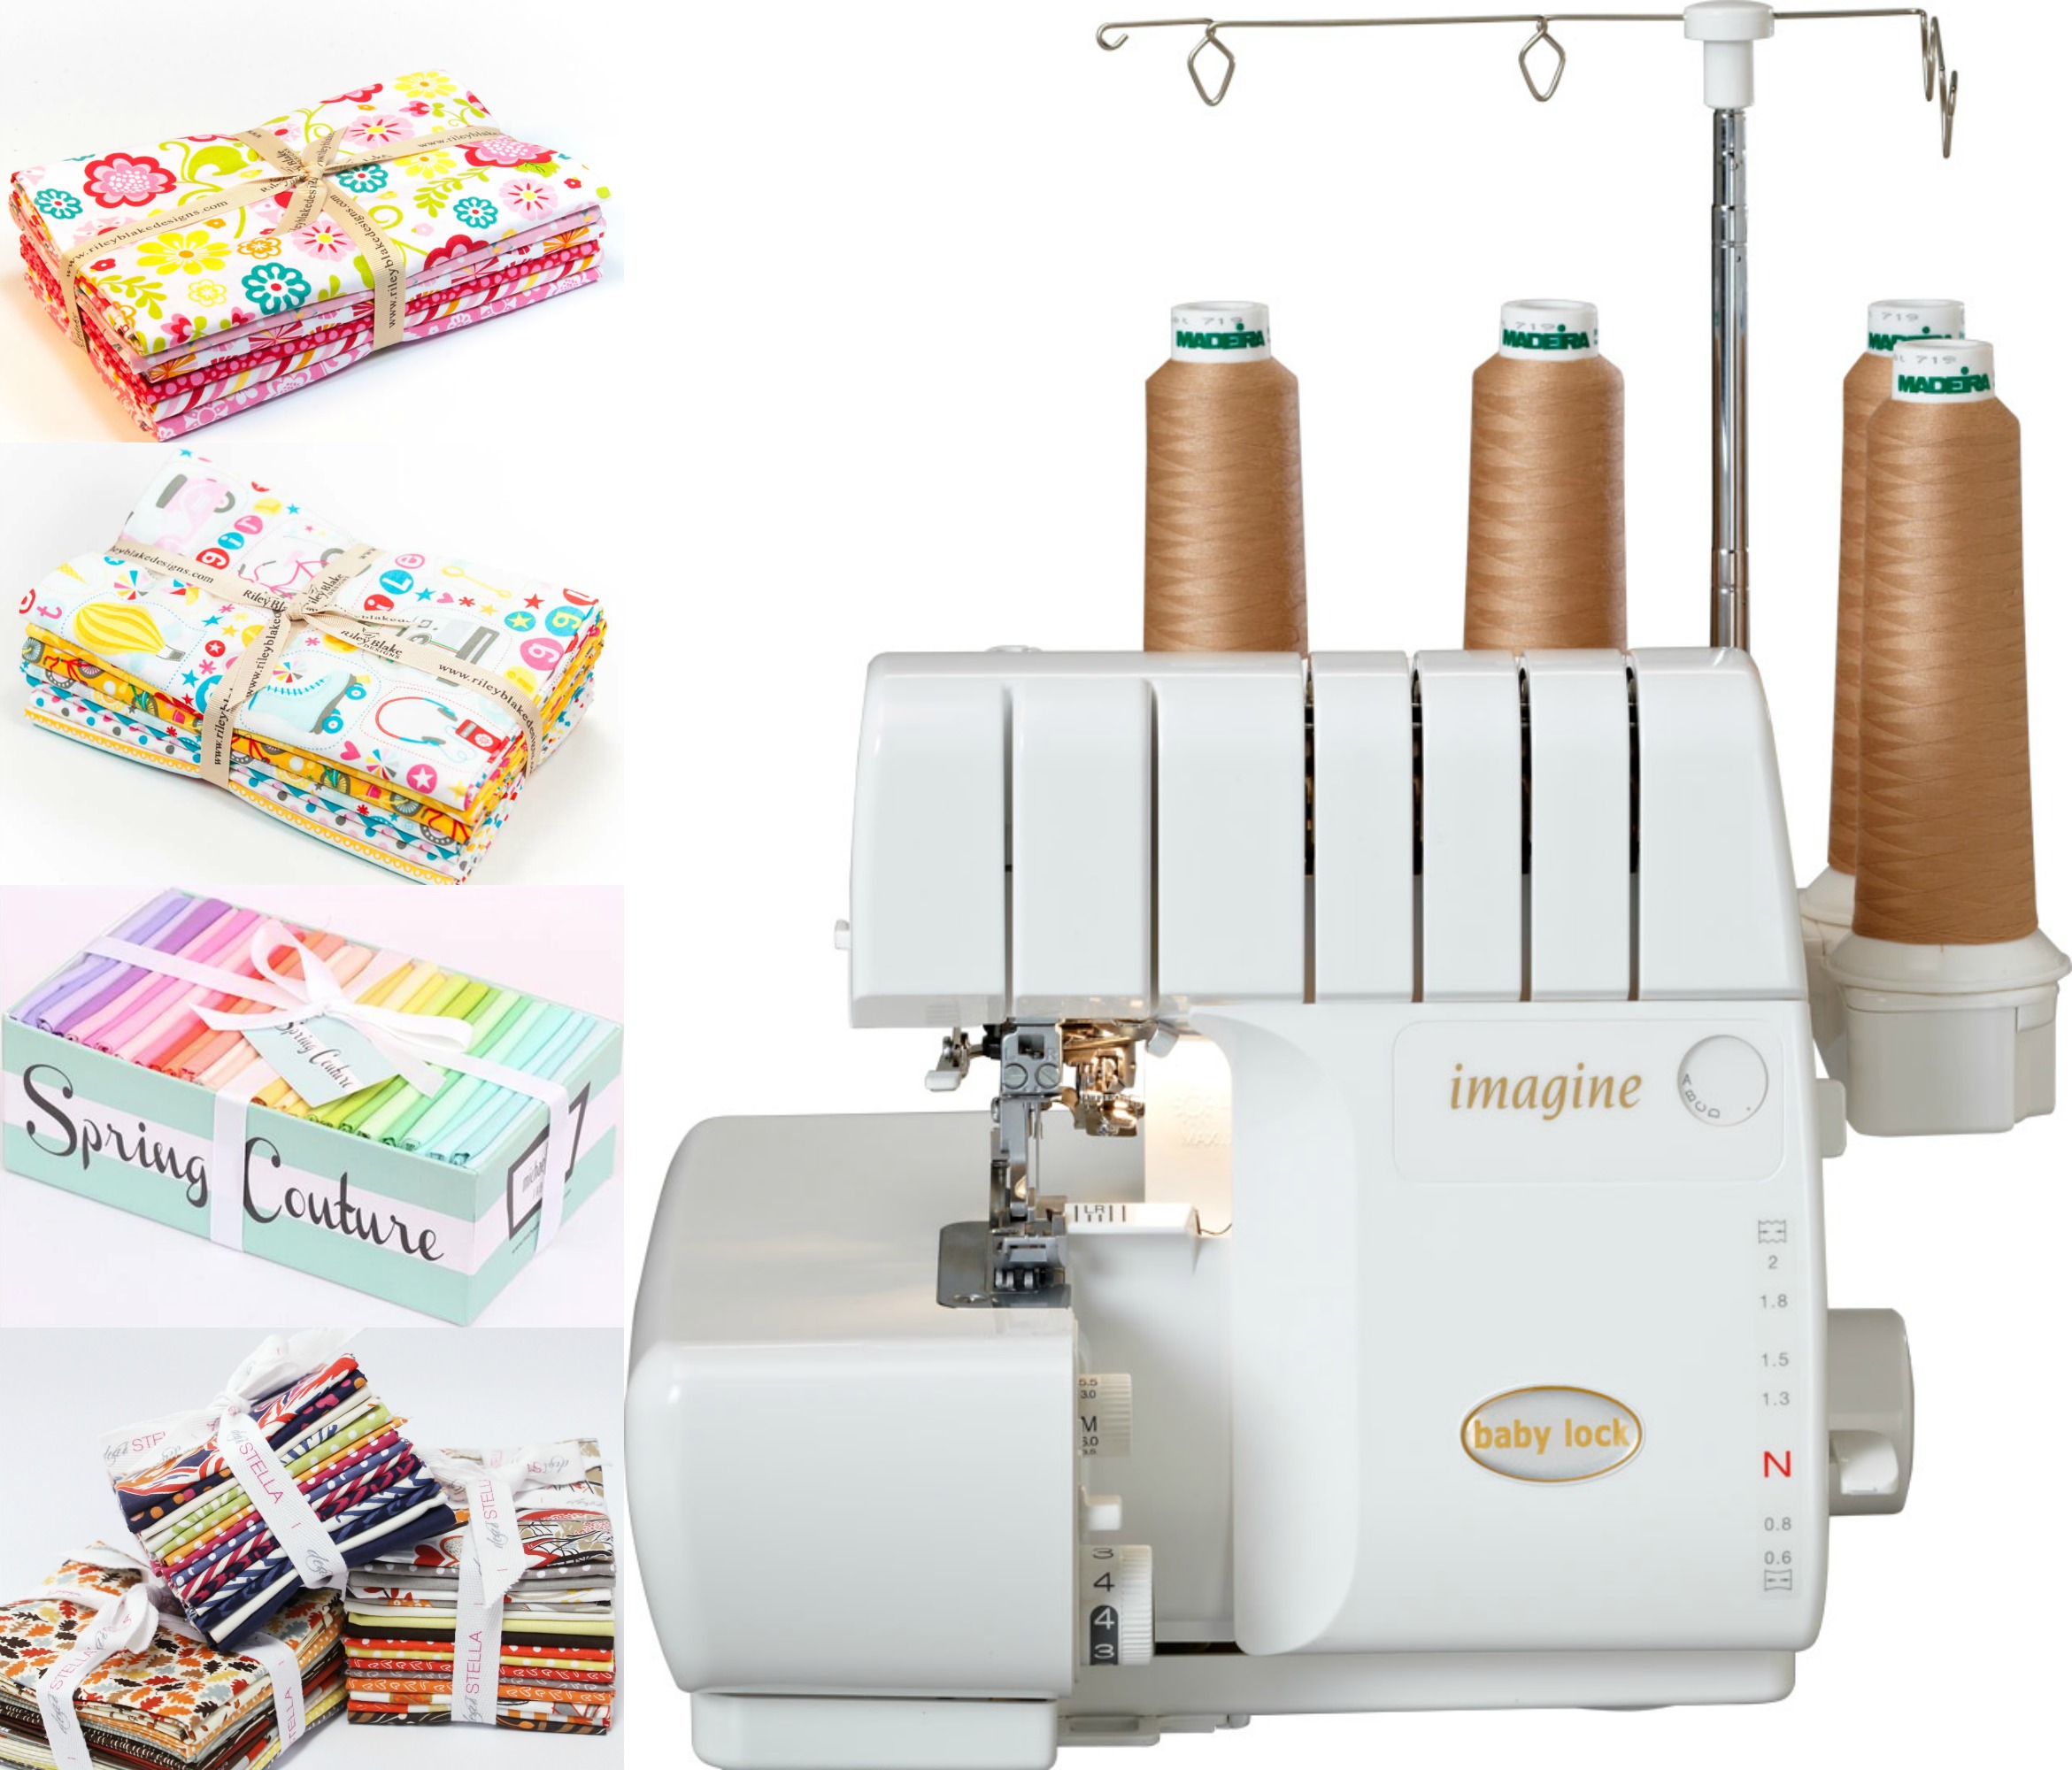 The Cottage Mama Sewing Studio. Check out this sewing space!  www.thecottagemama.com